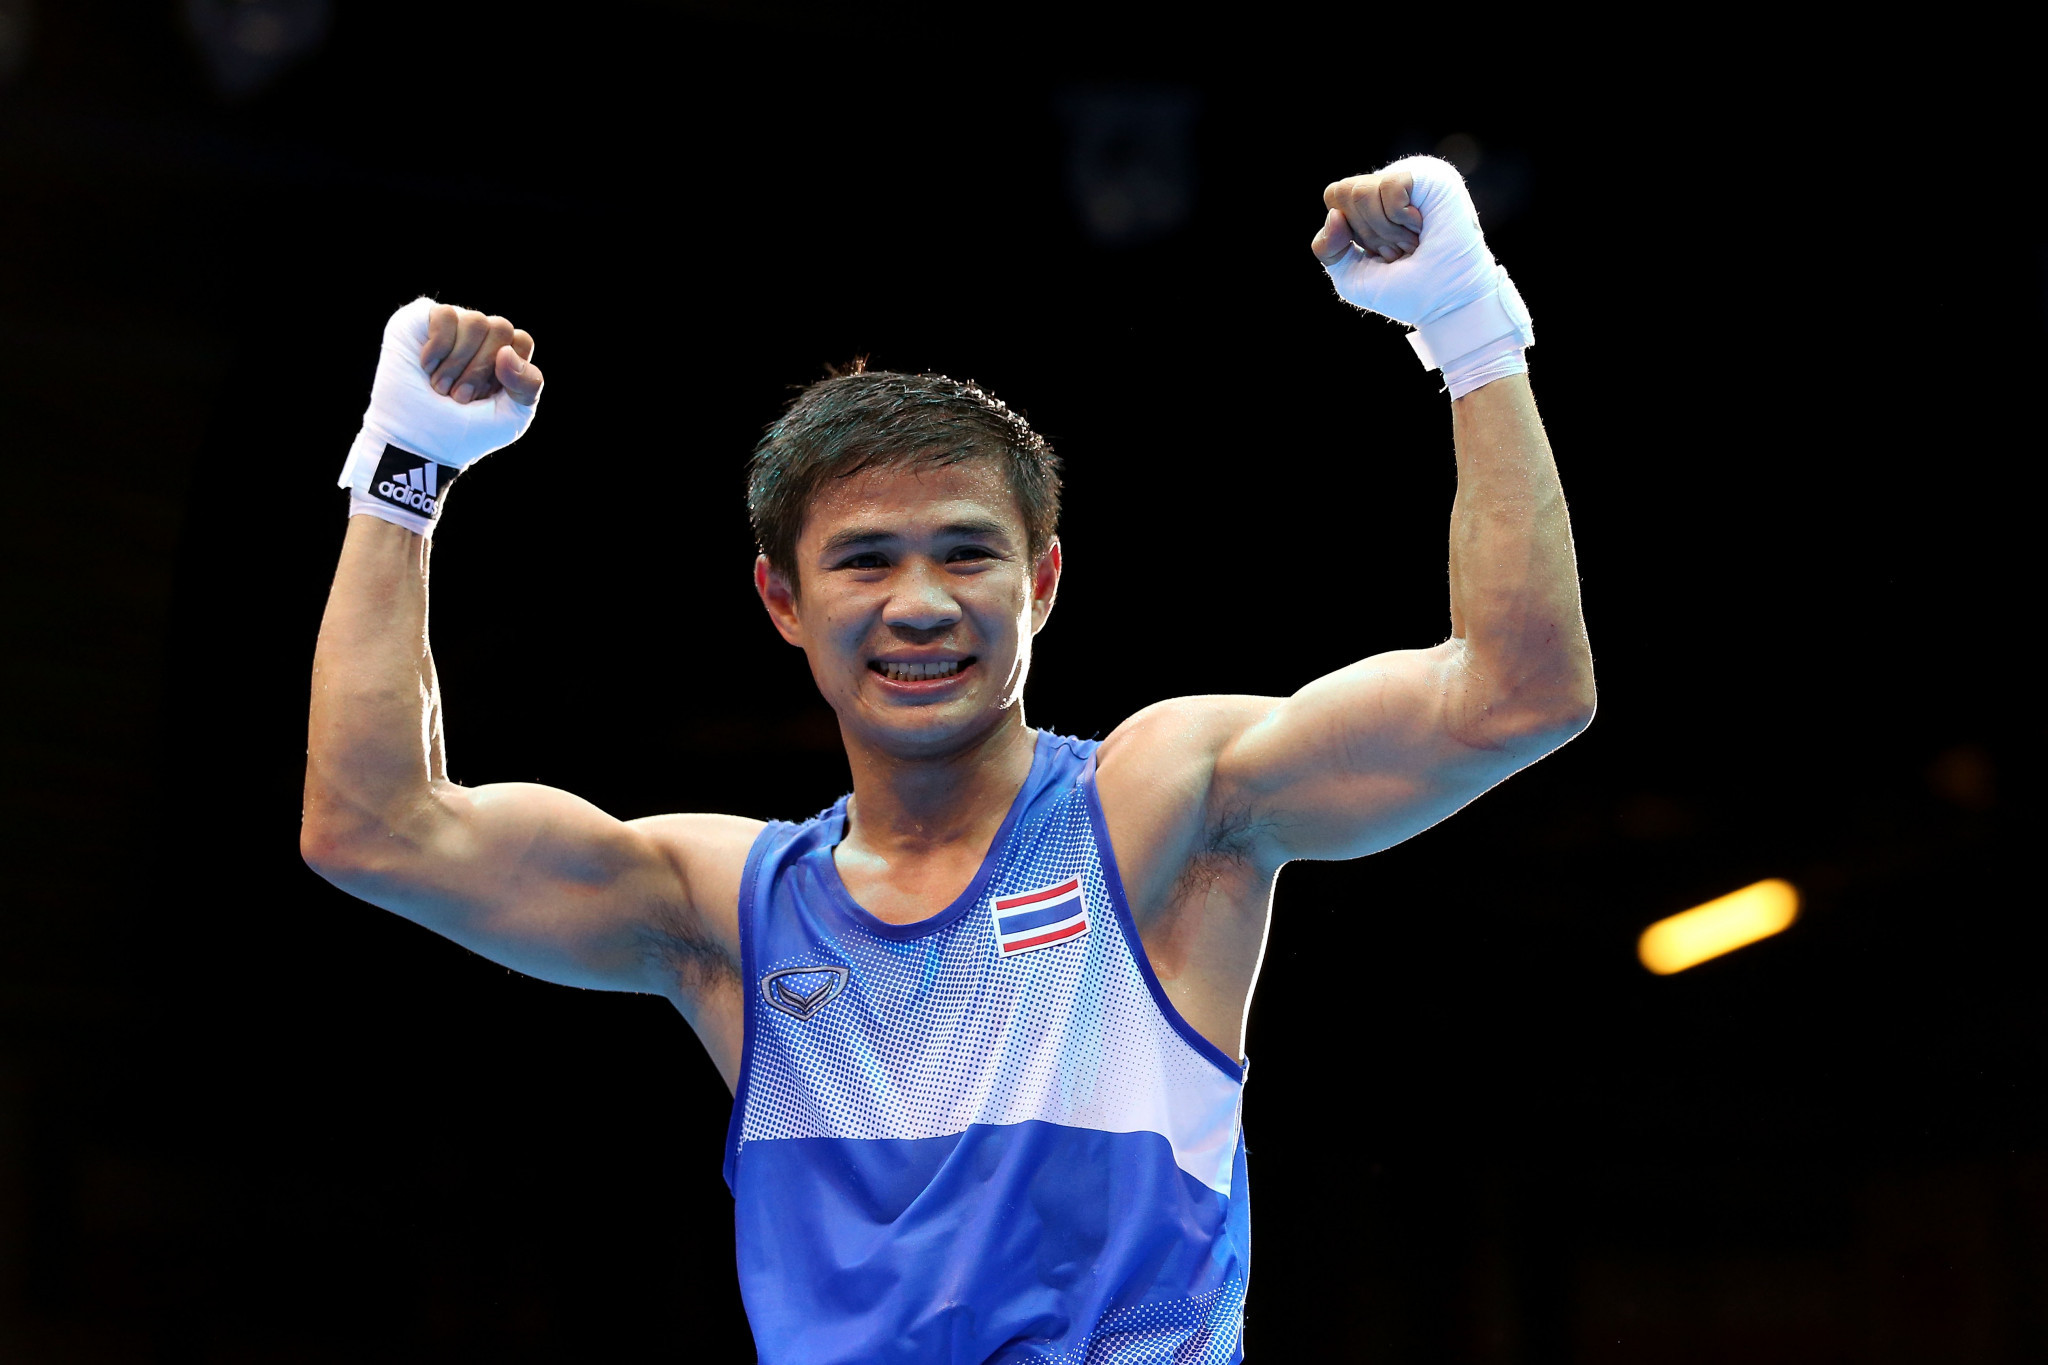 Boxing is one of Thailand's most successful sports at the Olympics ©Getty Images